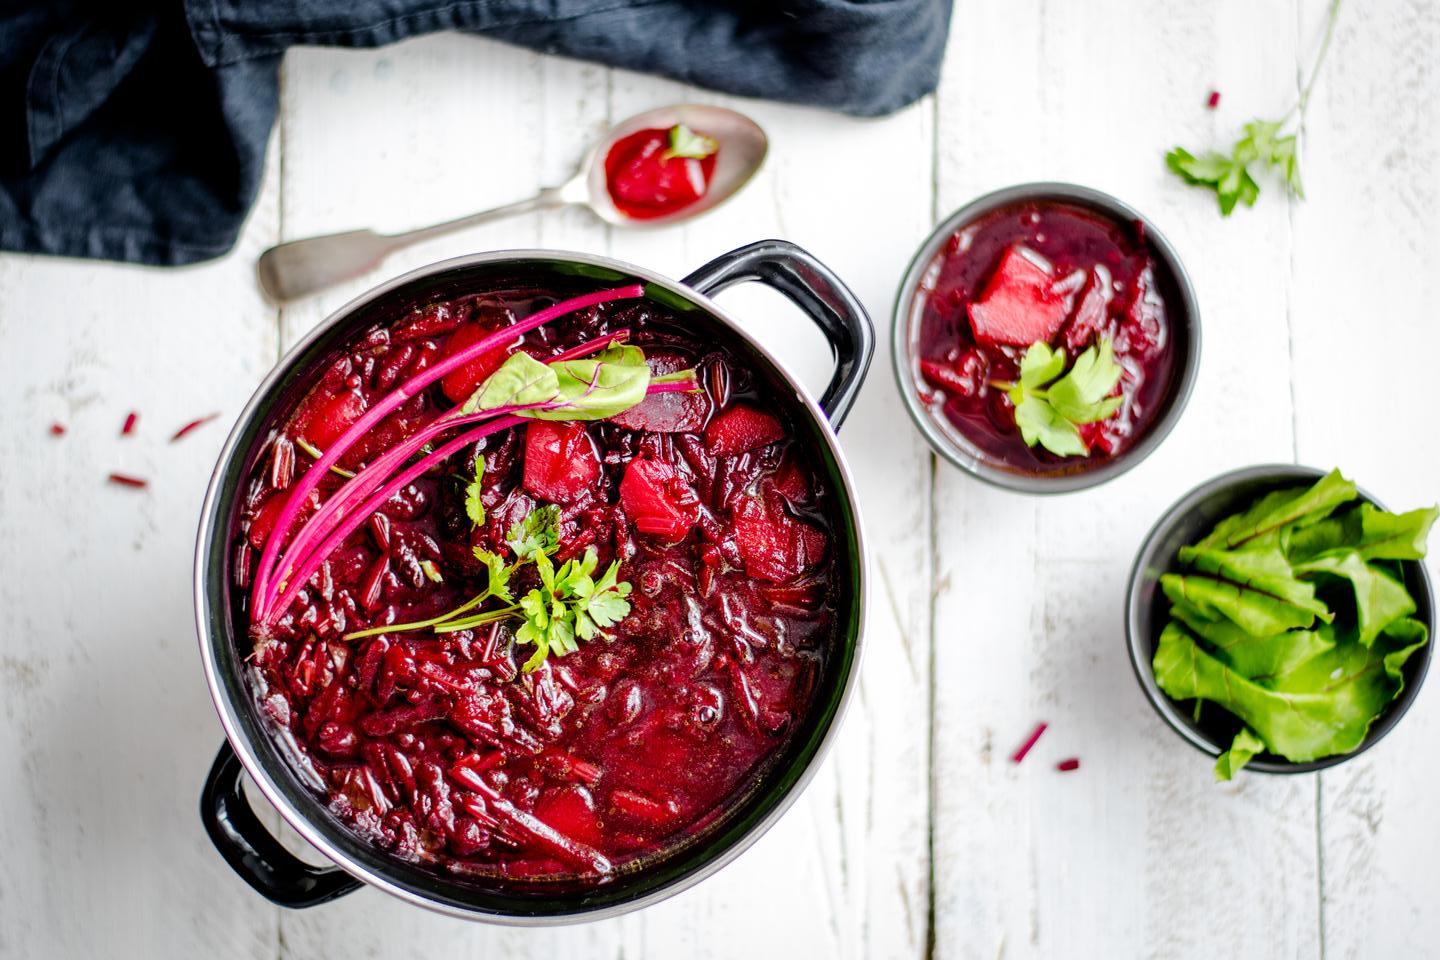 Go on a Food Adventure Around the World and My Quiz Algorithm Will Calculate Your Generation Borscht